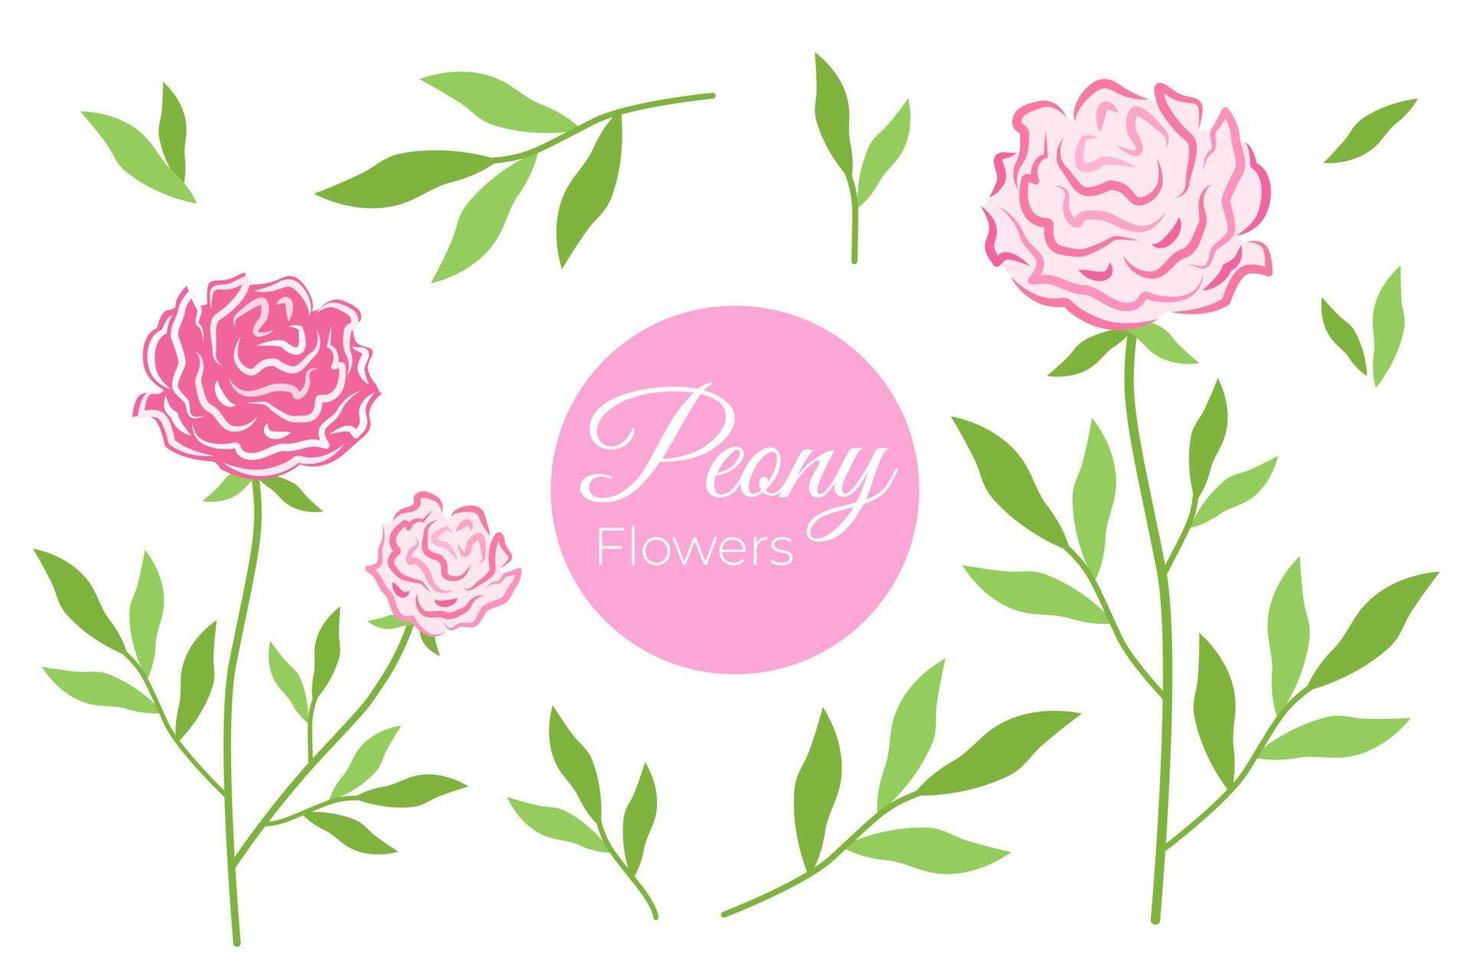 Pink blooming peony set. Floral vector illustration of rose on branch with green leaves and inflorescence. Botanical drawing of lush flower bud.